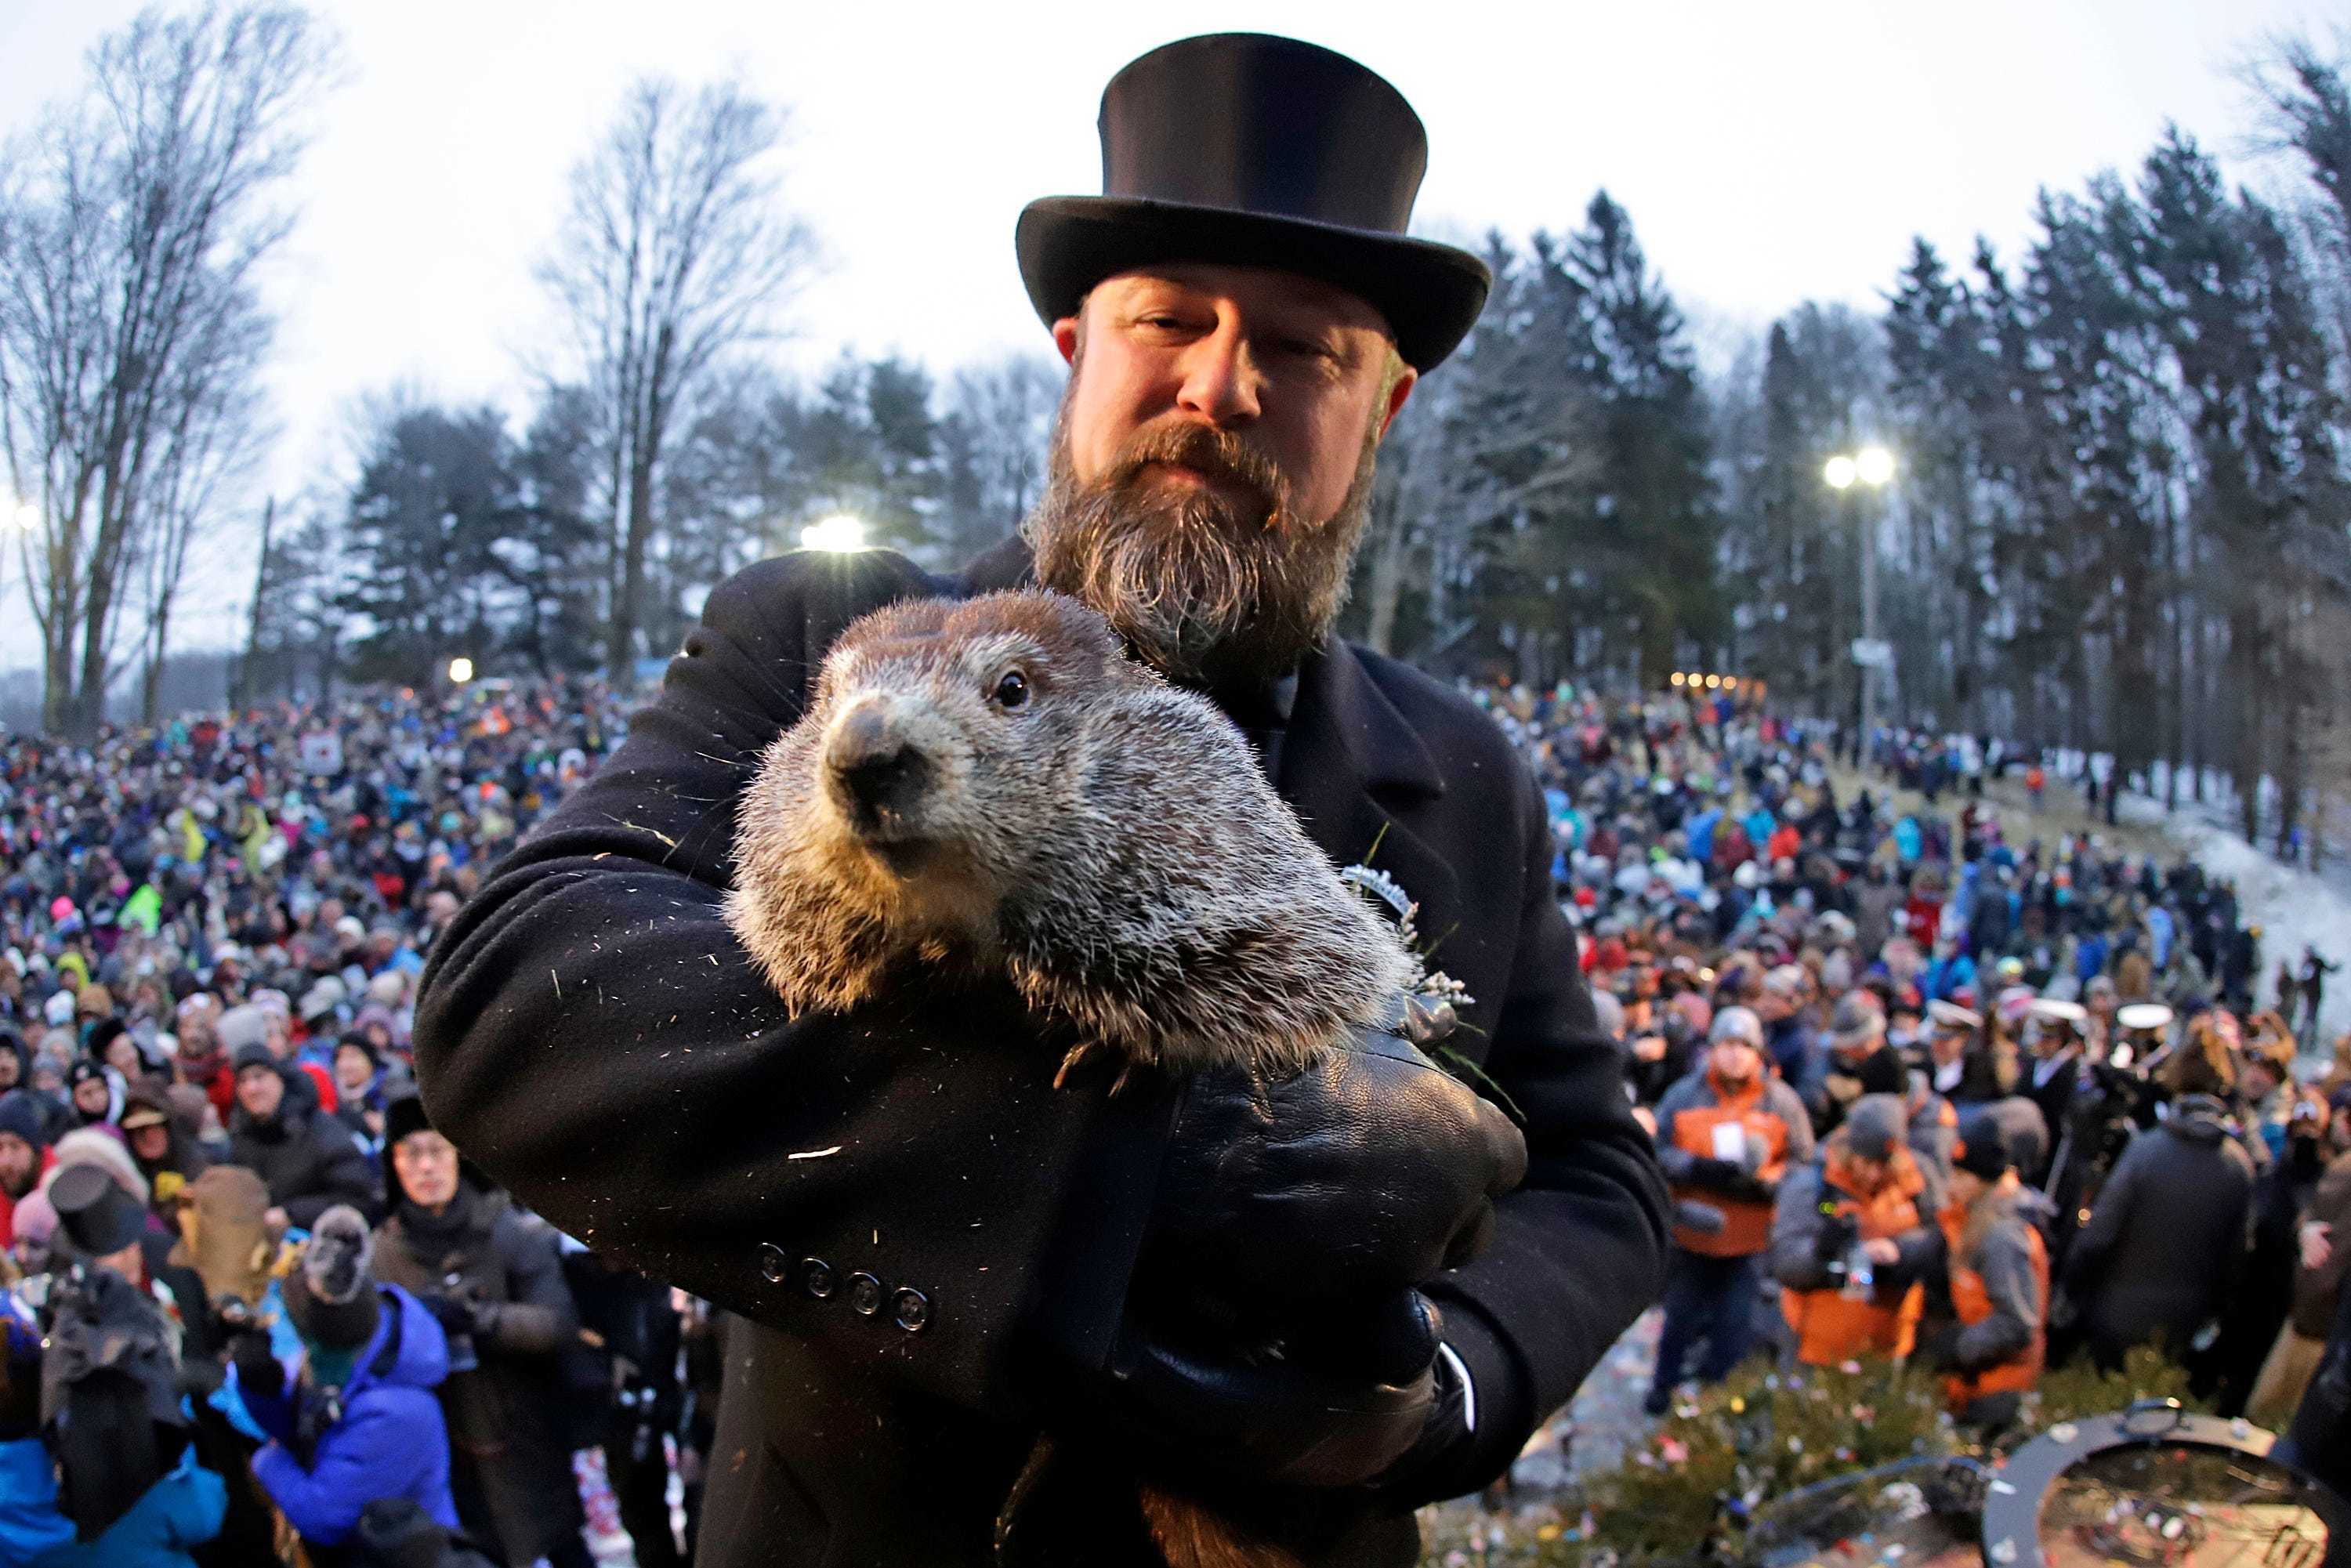 Groundhog Day 2020: No shadow means early spring! Unless it doesn't